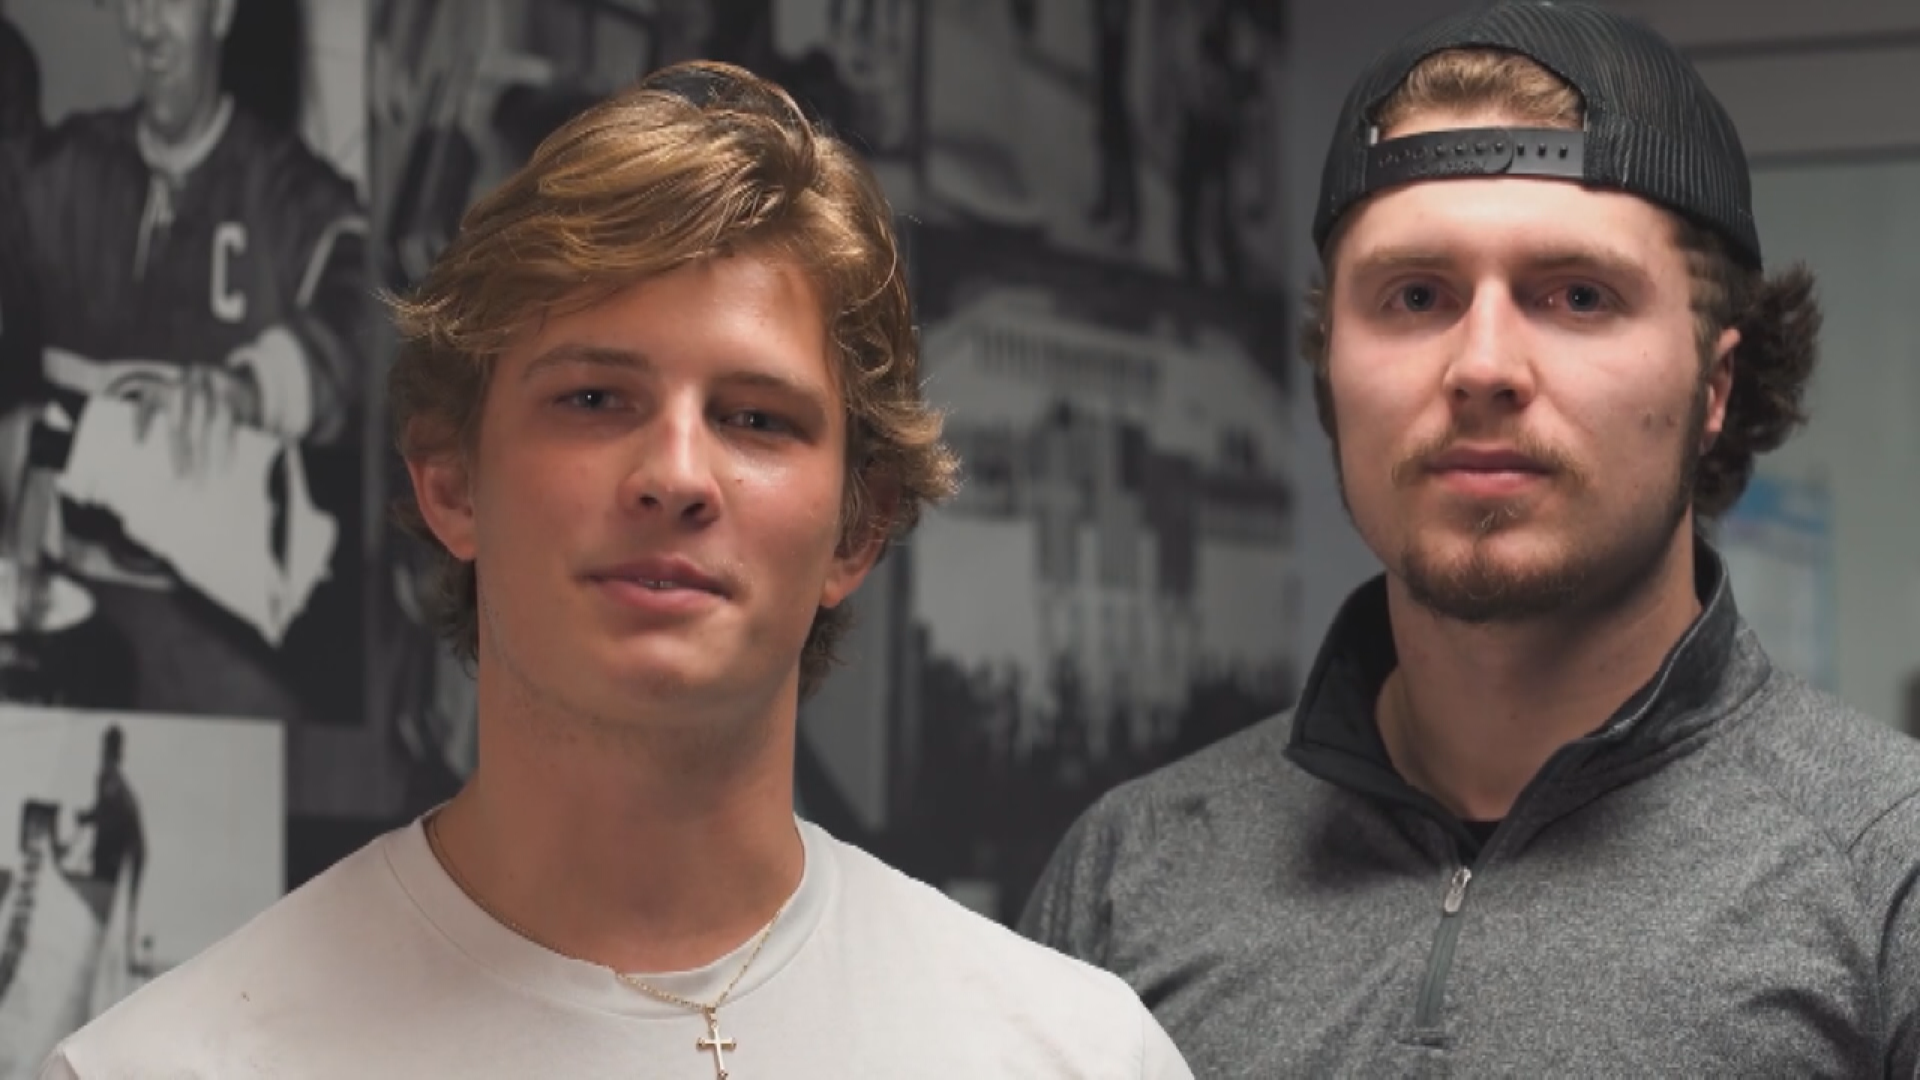 Connor Bizal and Adam Zukowski recently launched "Fellowship of Hockey Advancement," a free online mentorship program for high school and junior hockey players.